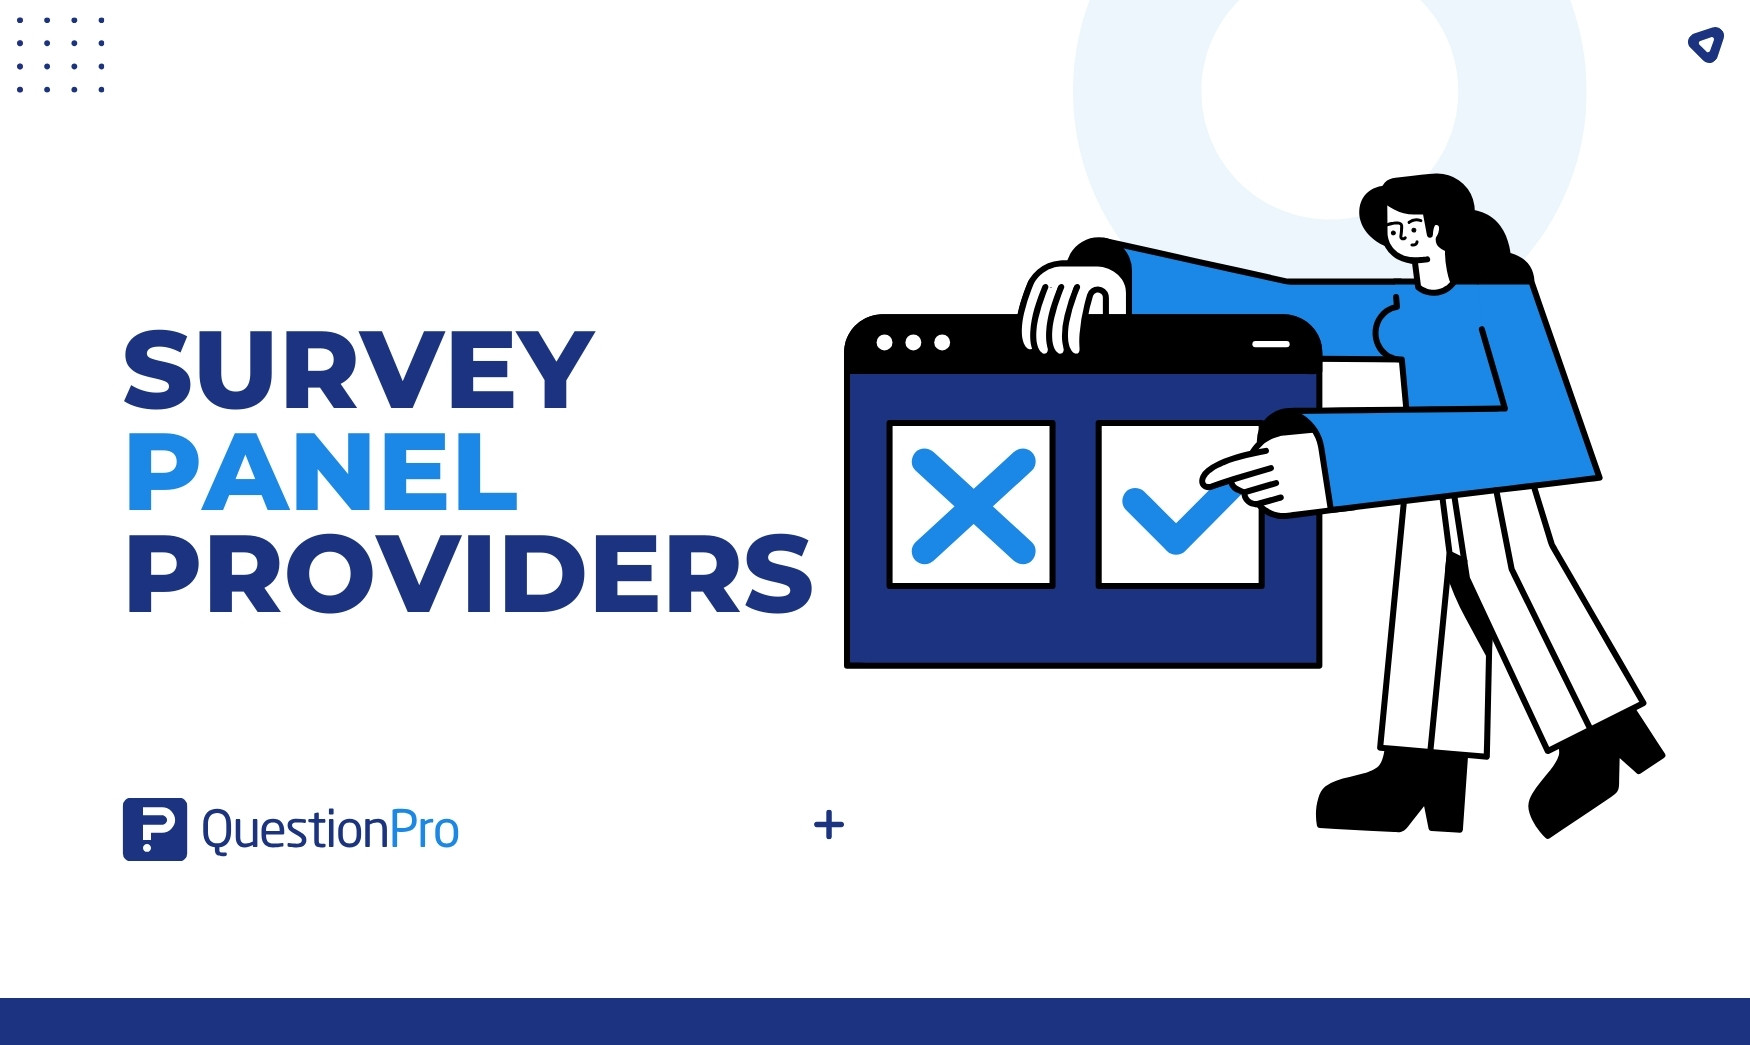 Discover how survey panel providers streamline data collection, offering diverse demographics and efficiency for your research needs.